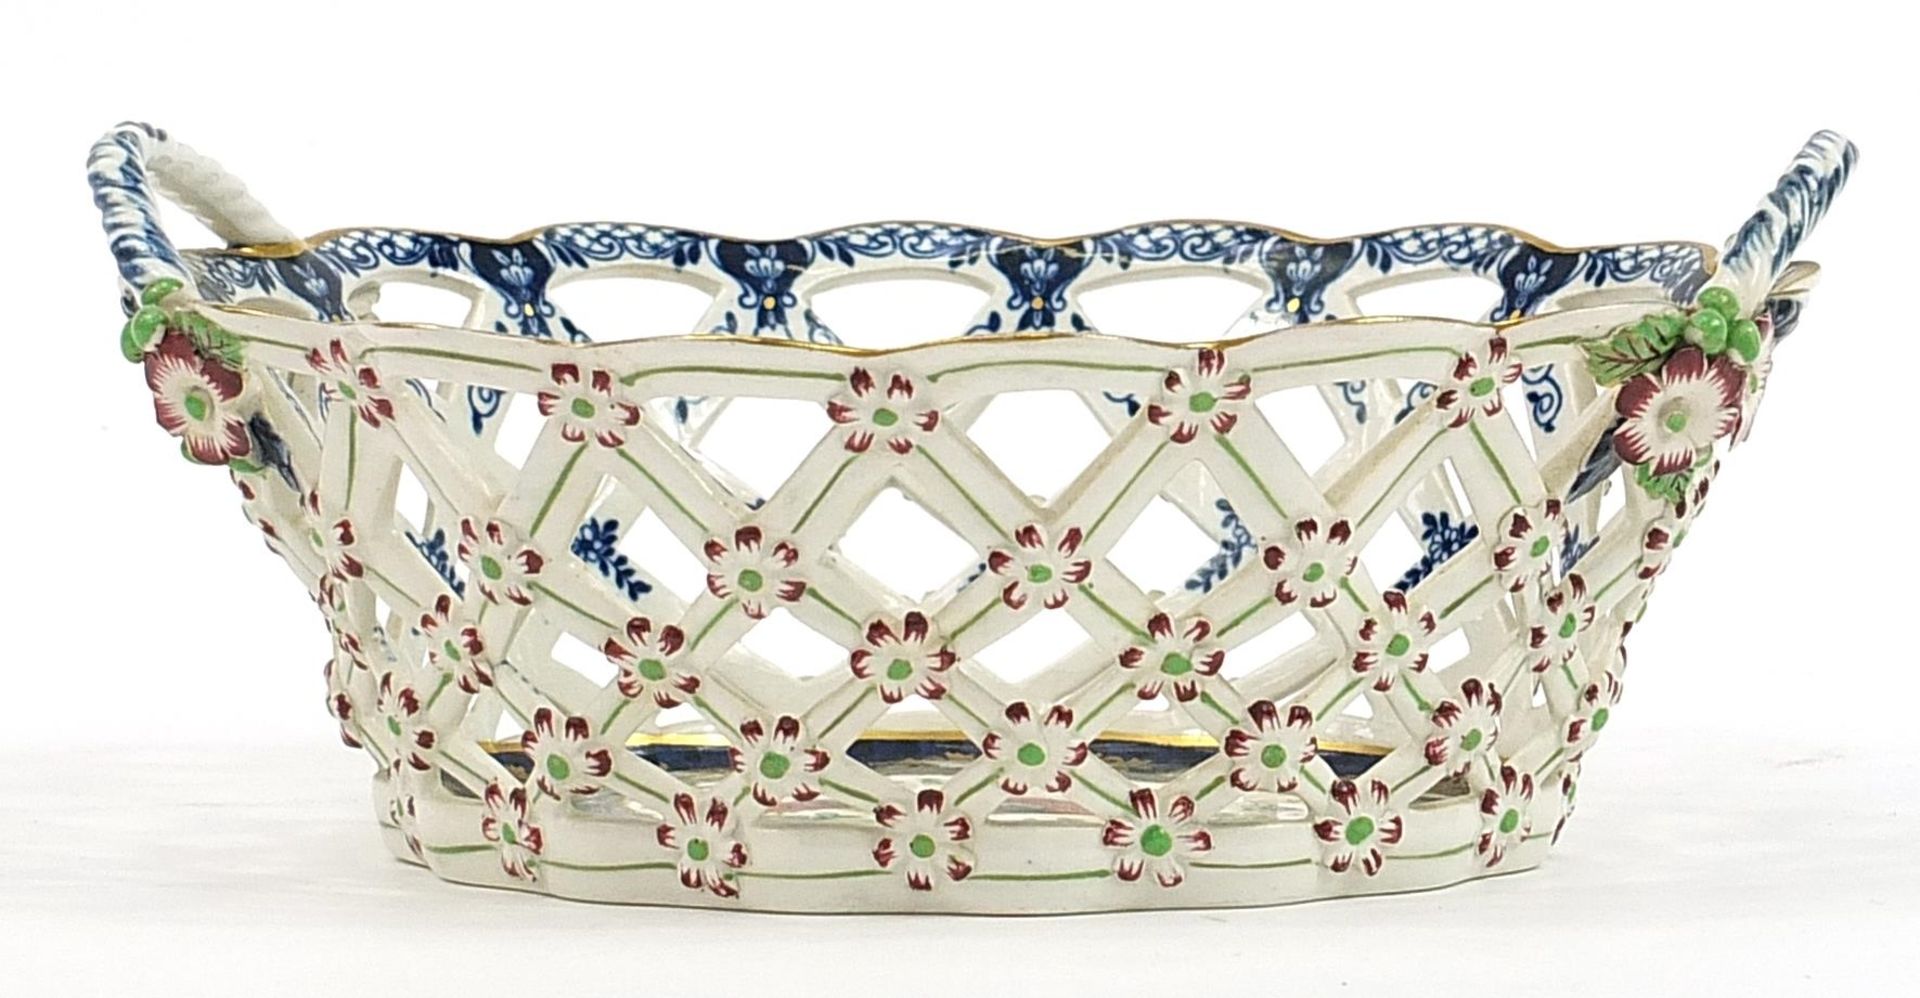 18th/19th century porcelain basket hand painted with birds of paradise and insects in the style of - Image 2 of 5